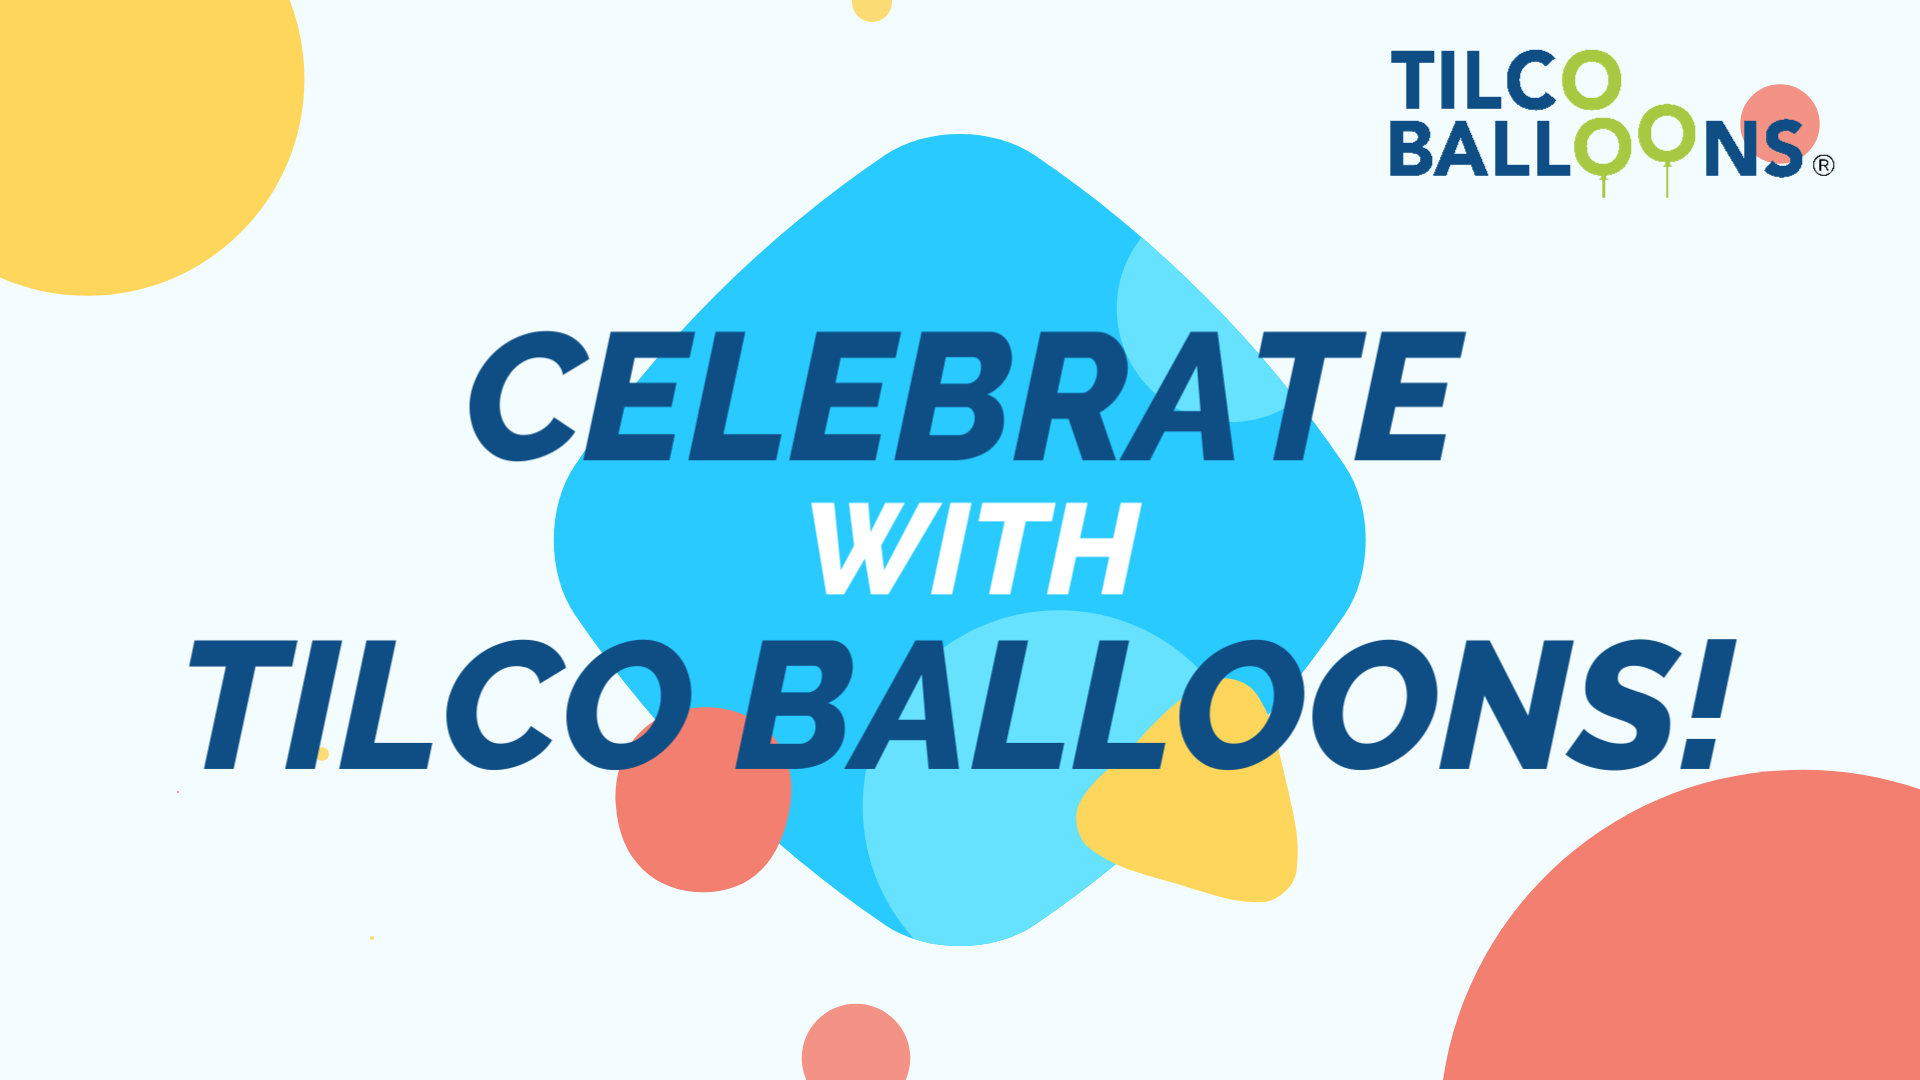 Load video: Tilco Balloons Mision